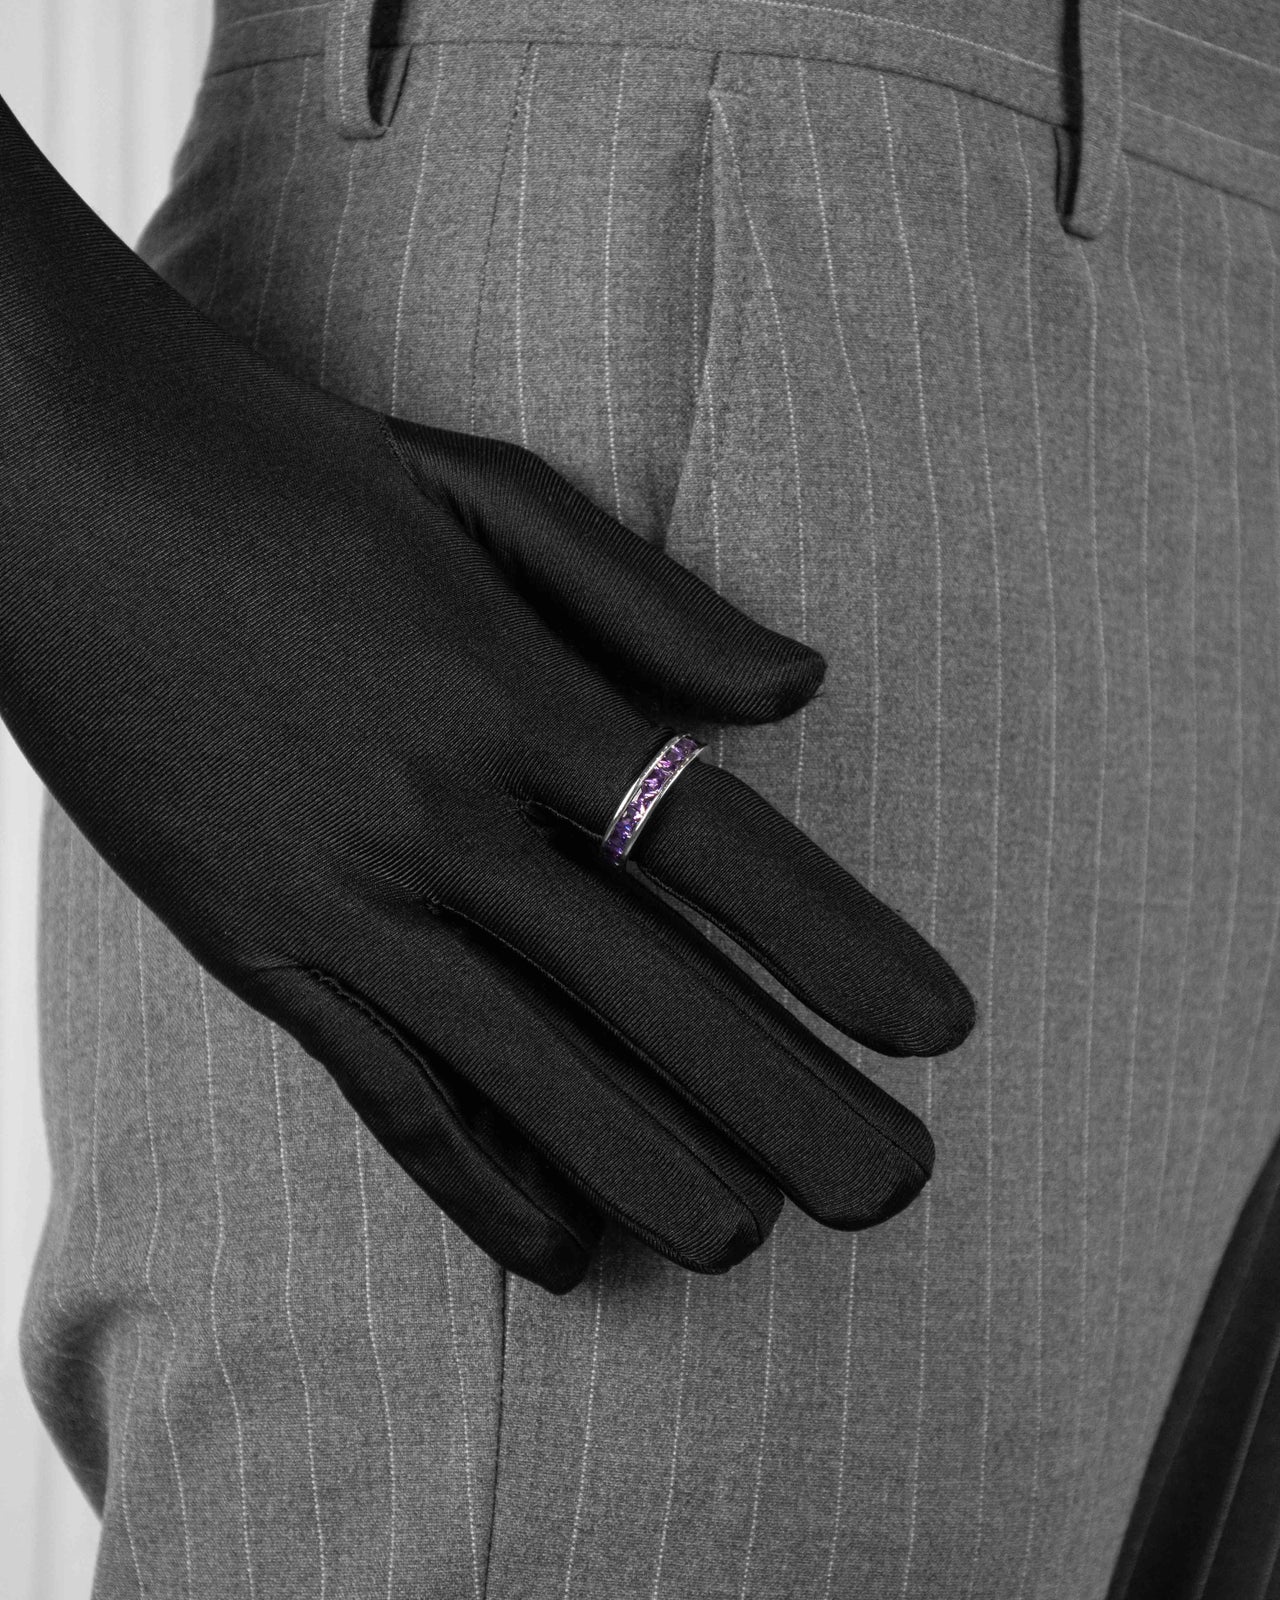 white gold ring with purple stones for man and women